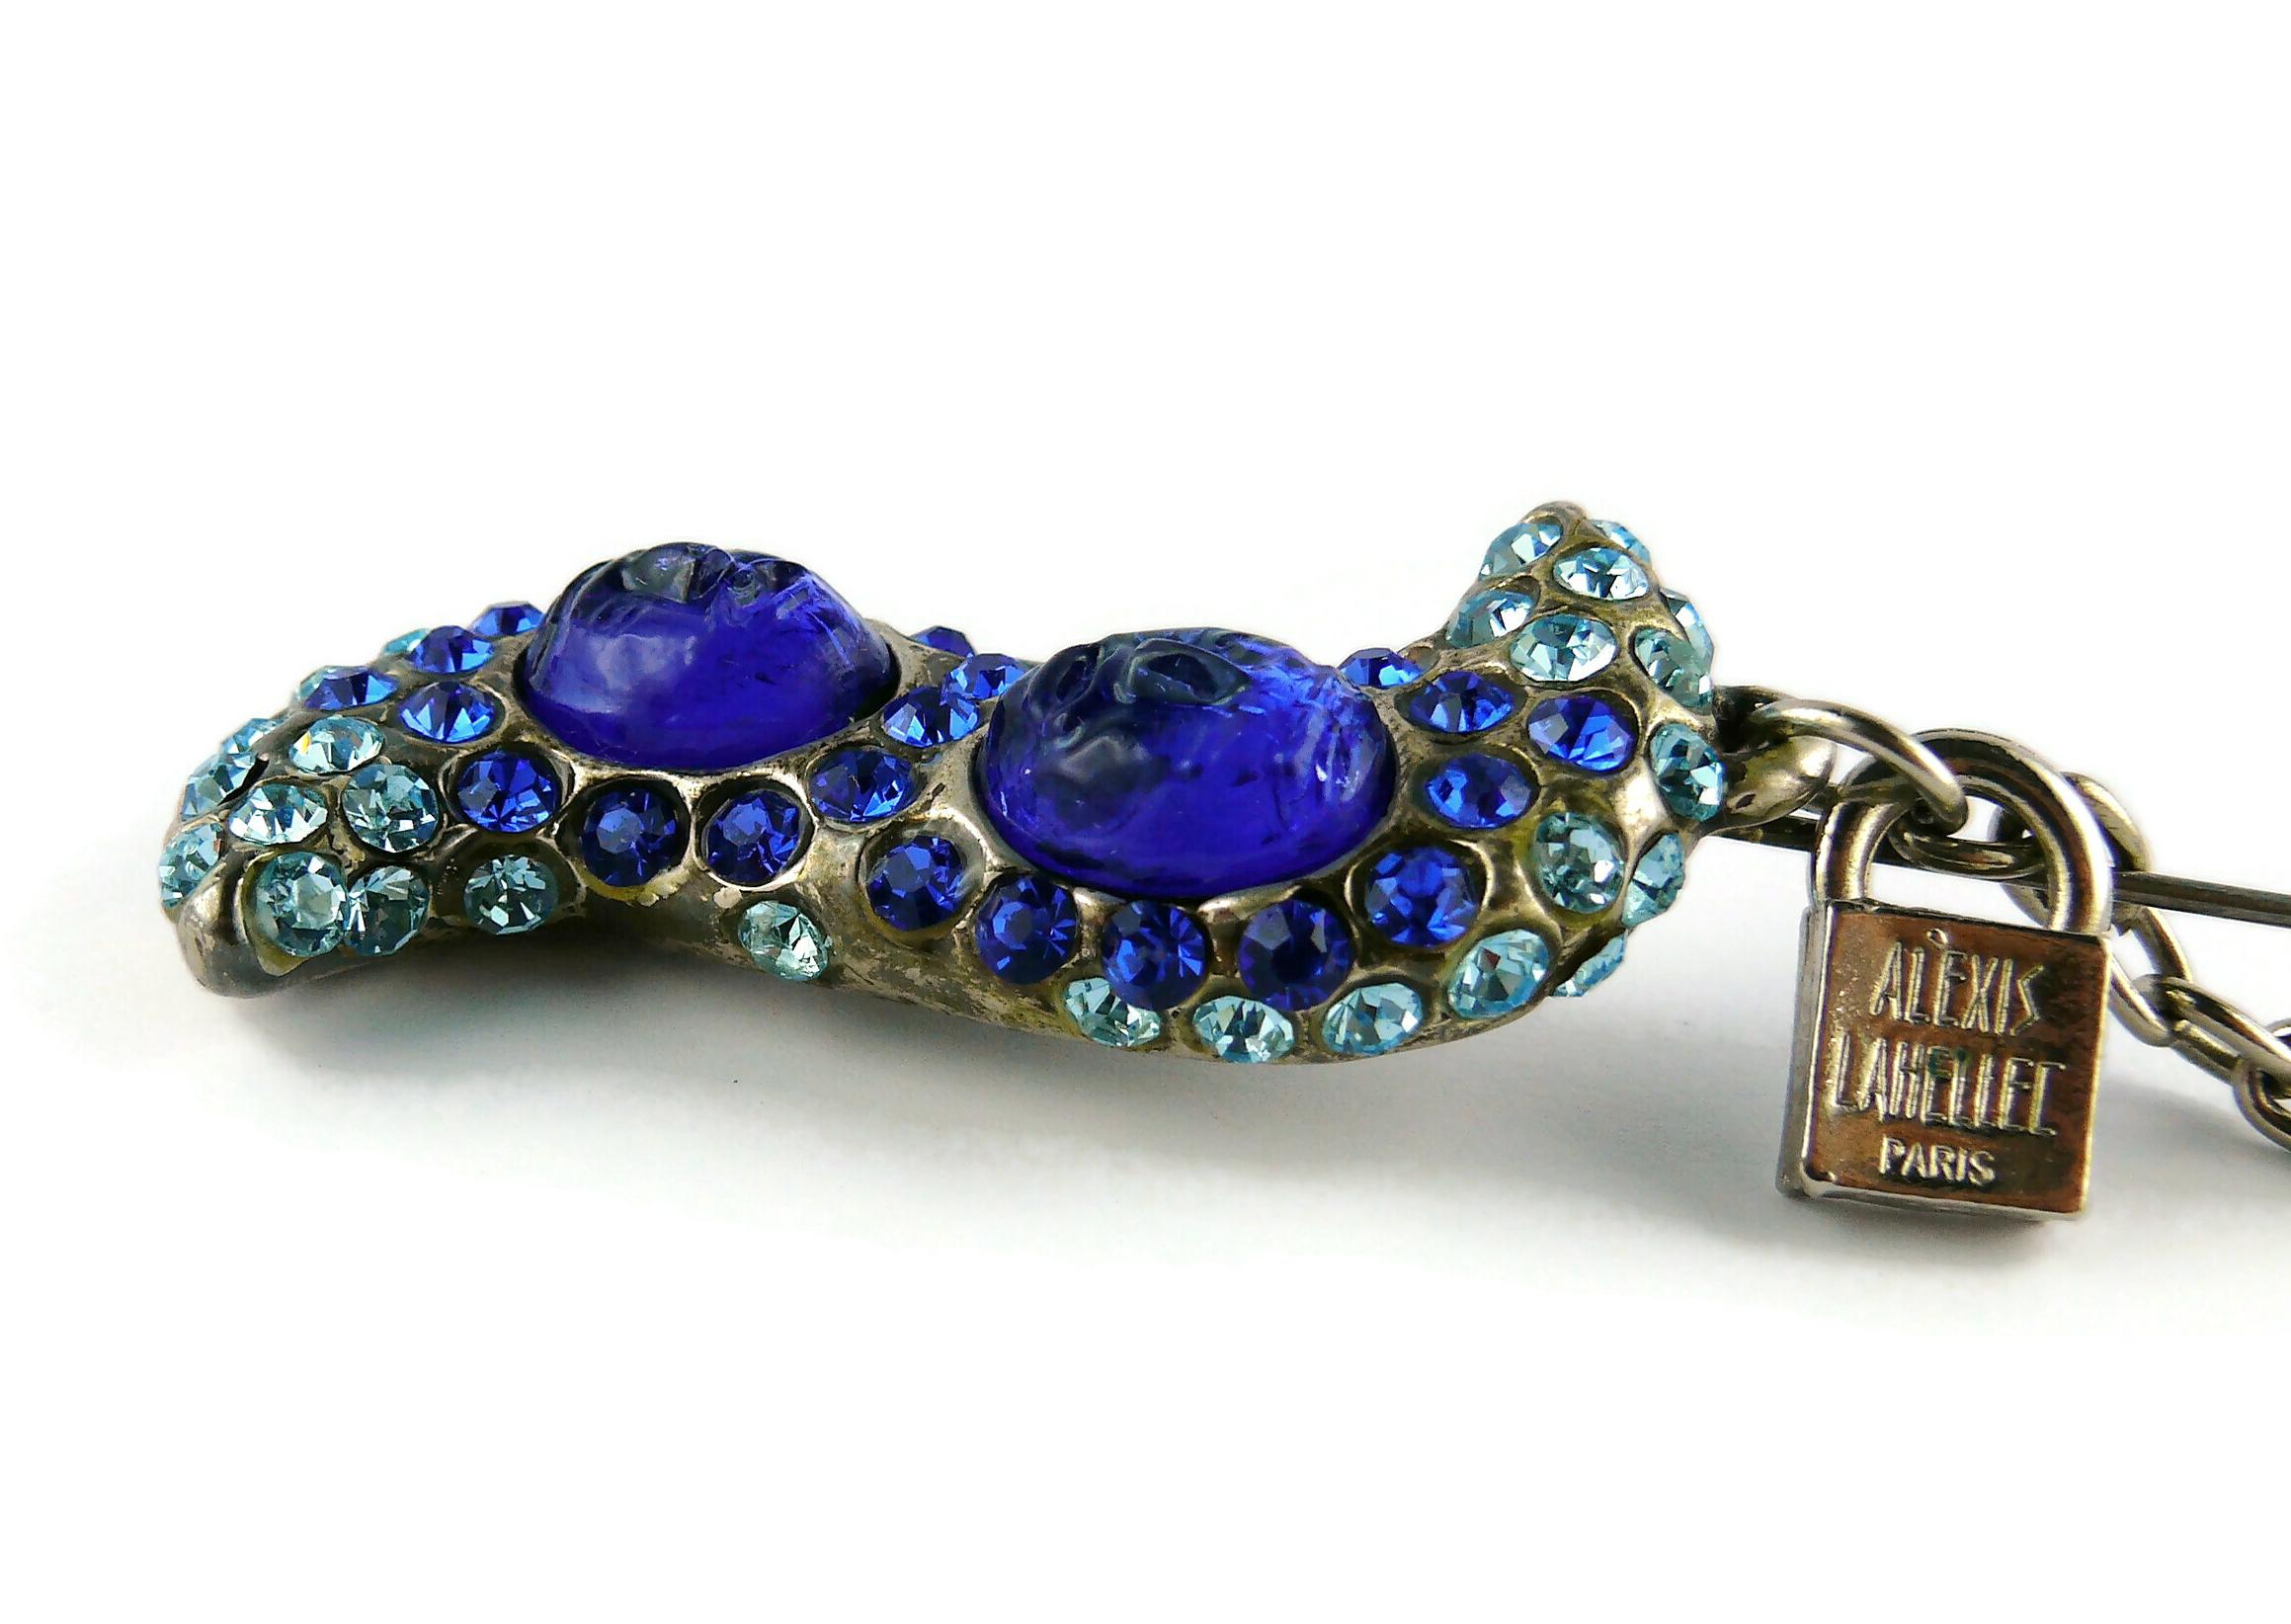 Alexis Lahellec Vintage Oversized Jewelled Pin Brooch For Sale 3